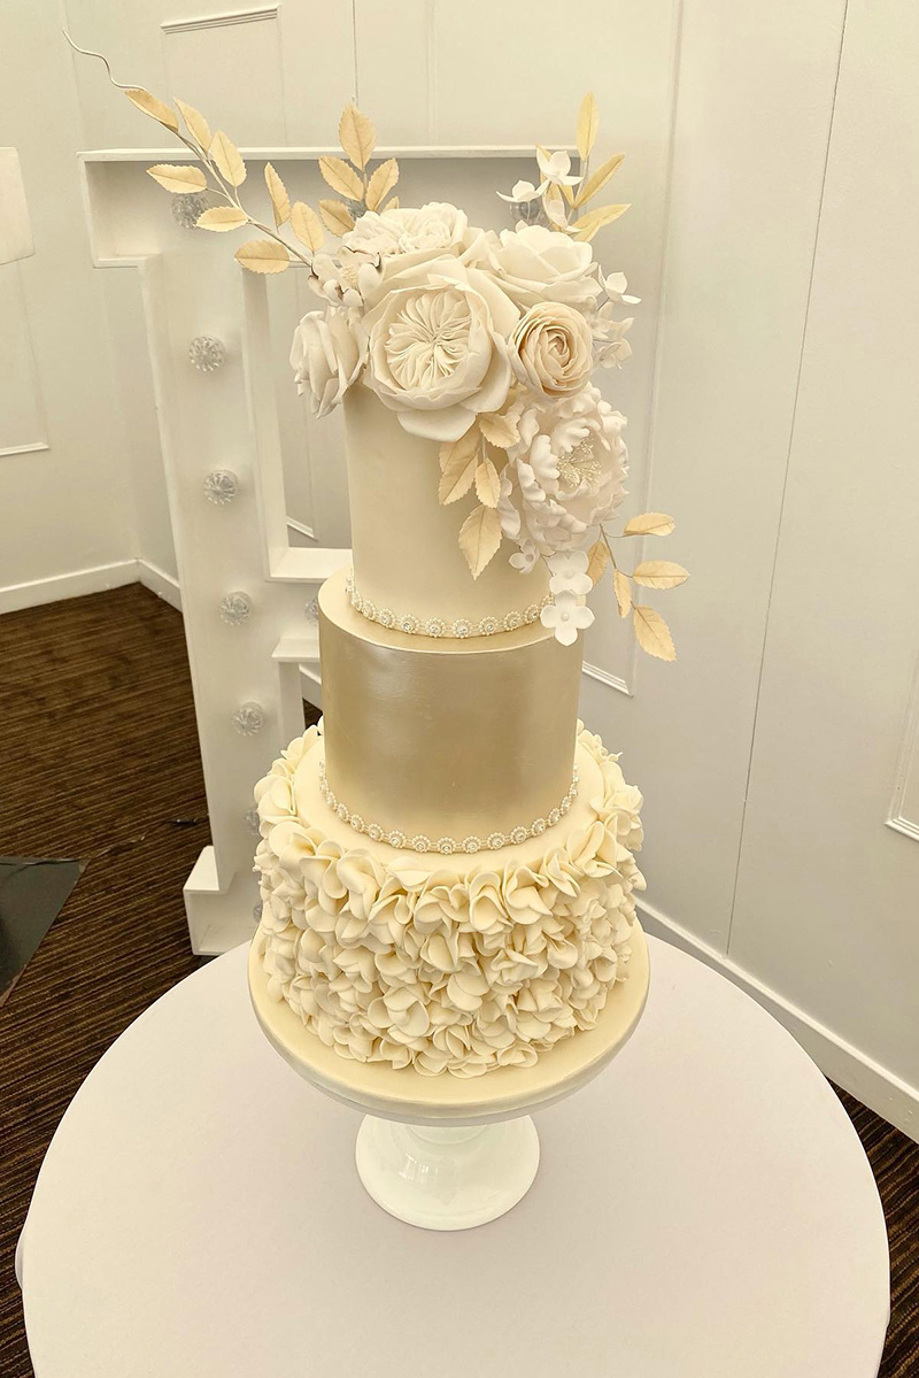 Cream three-tier cake with cream flowers and decorative branches